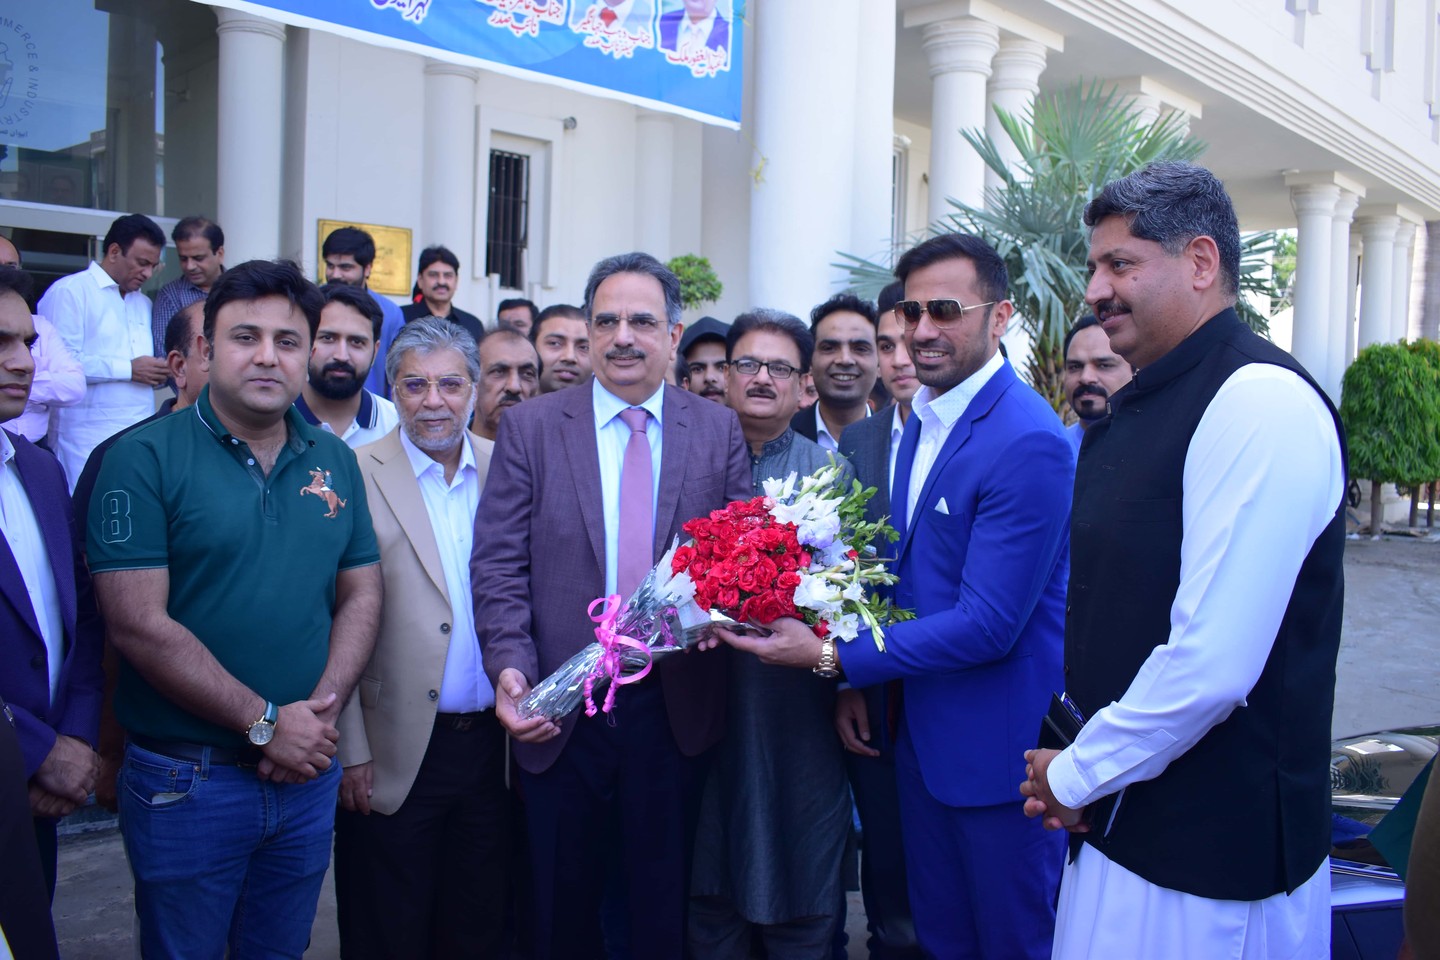 On May 25, 2023, Mr. Abdul Ghafoor Malik, President of Sialkot Chamber of Commerce & Industry, welcomed Mr. Wahab Riaz, Advisor to Chief Minister Punjab on Youth Affairs and Sports Department, along with Dr. Aasif Tufail, Director General Sports Punjab, and Syed Umair Hassan, Director Youth Affairs. They visited the Sialkot Chamber where various discussions took place. Mr. Abdul Ghafoor Malik expressed gratitude to Mr. Wahab Riaz for approving funds to complete the High-Performance Center Sialkot, as requested by the Chamber. He emphasized the importance of Phase II and requested timely funds for its completion. Mr. Abdul Ghafoor Malik also urged the completion of other sports projects in Sialkot, including Football and Hockey Grounds, and proposed a sports complex in Sialkot at Tehsil Level. Later, they inaugurated the newly established High-Performance Center Blocks at Jinnah Stadium, Sialkot. Mr. Adnan Mahmood Awan, Deputy Commissioner Sialkot, also attended the opening ceremony. Mr. Wahab Riaz, the Sports Adviser Punjab, highlighted the center’s role in the development of Pakistan Cricket and announced the upcoming project for Jinnah Stadium Sialkot. He emphasized hiring top coaches for the High-Performance Center to nurture new cricket talent. Dr. Asif Tufail, Director General Sports Punjab, mentioned the efforts to provide modern facilities to players, enabling them to compete internationally. He expressed confidence in the Sialkot Cricket High Performance Center and its potential to bring fame to Pakistan through young players. Mr. Adnan Mahmood Awan assured the arrangement of practice wickets for players, while Mr. Qaiser Raza, Project Director PMU, briefed about the project’s cost and state-of-the-art facilities. The participants appreciated the Sialkot Chamber of Commerce for their efforts in promoting sports and providing excellent facilities.